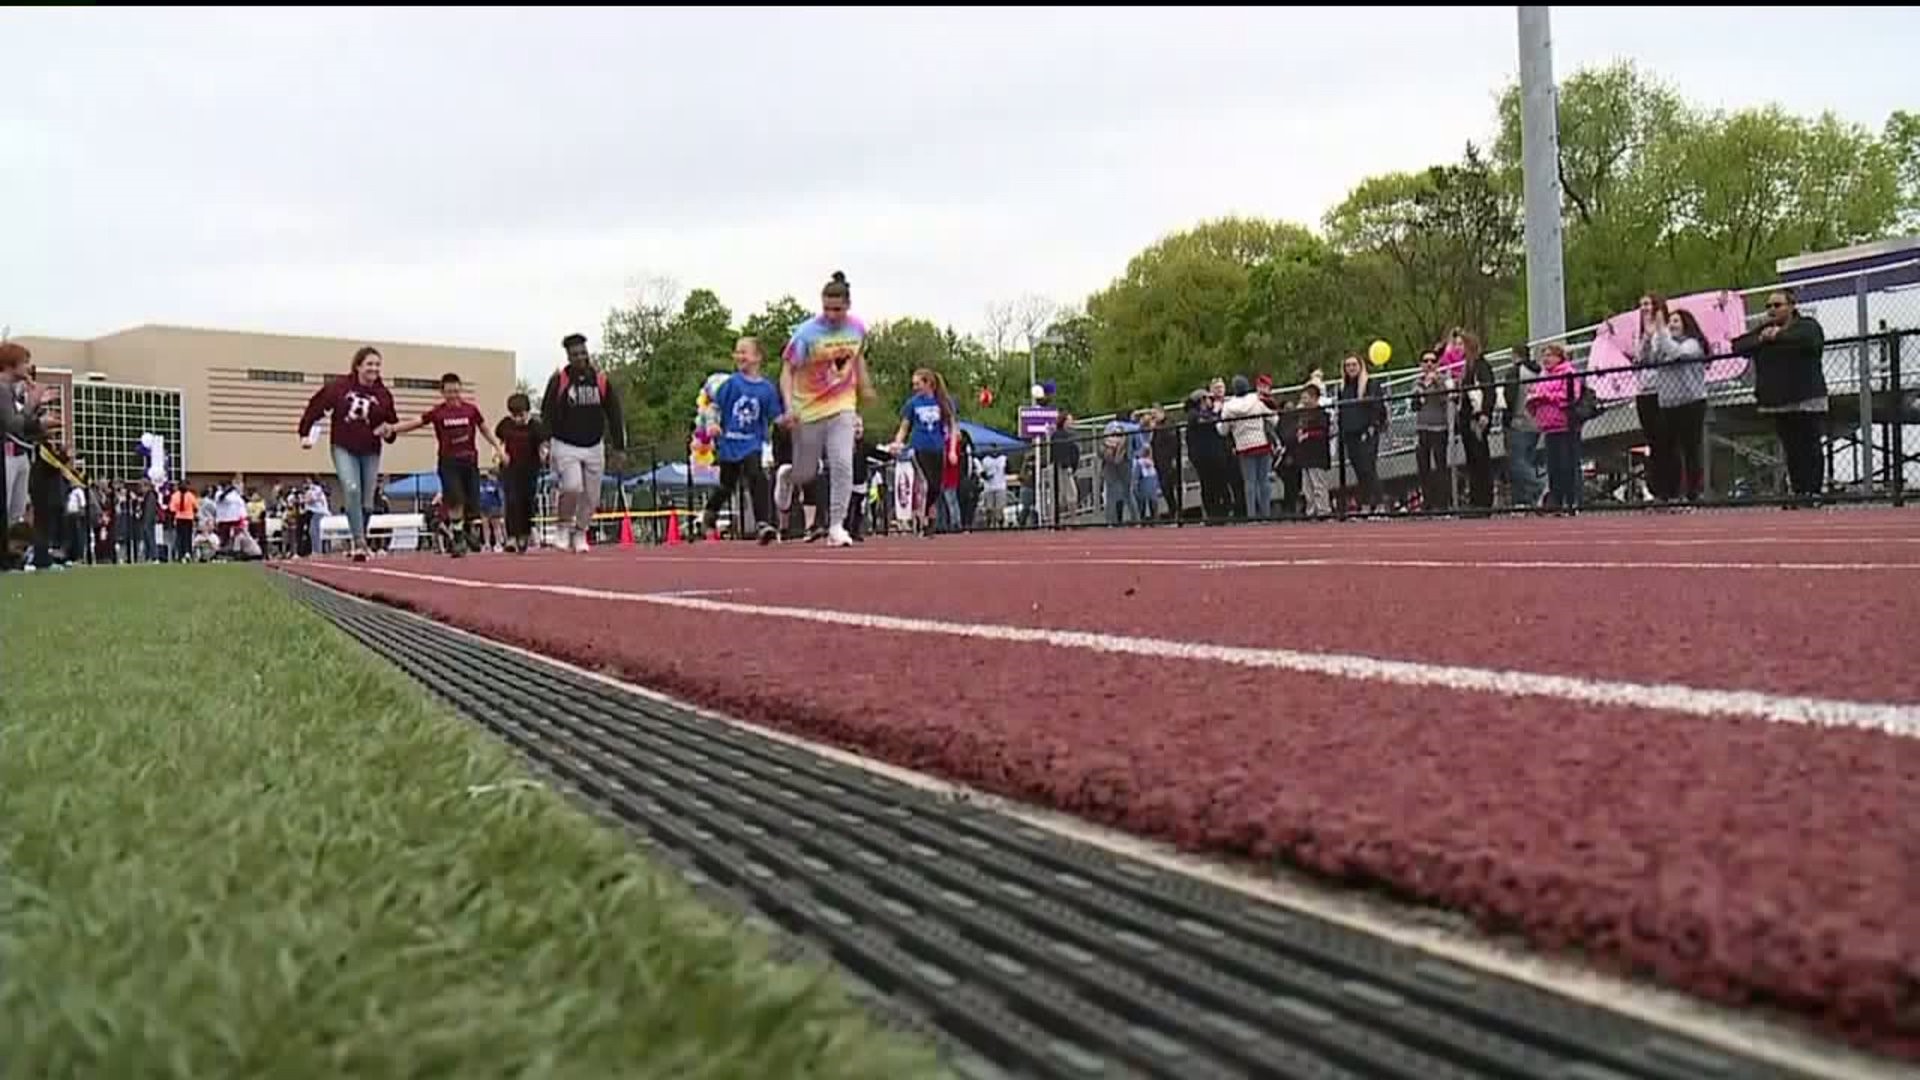 Special Olympics Hosts Hundreds of Young Athletes